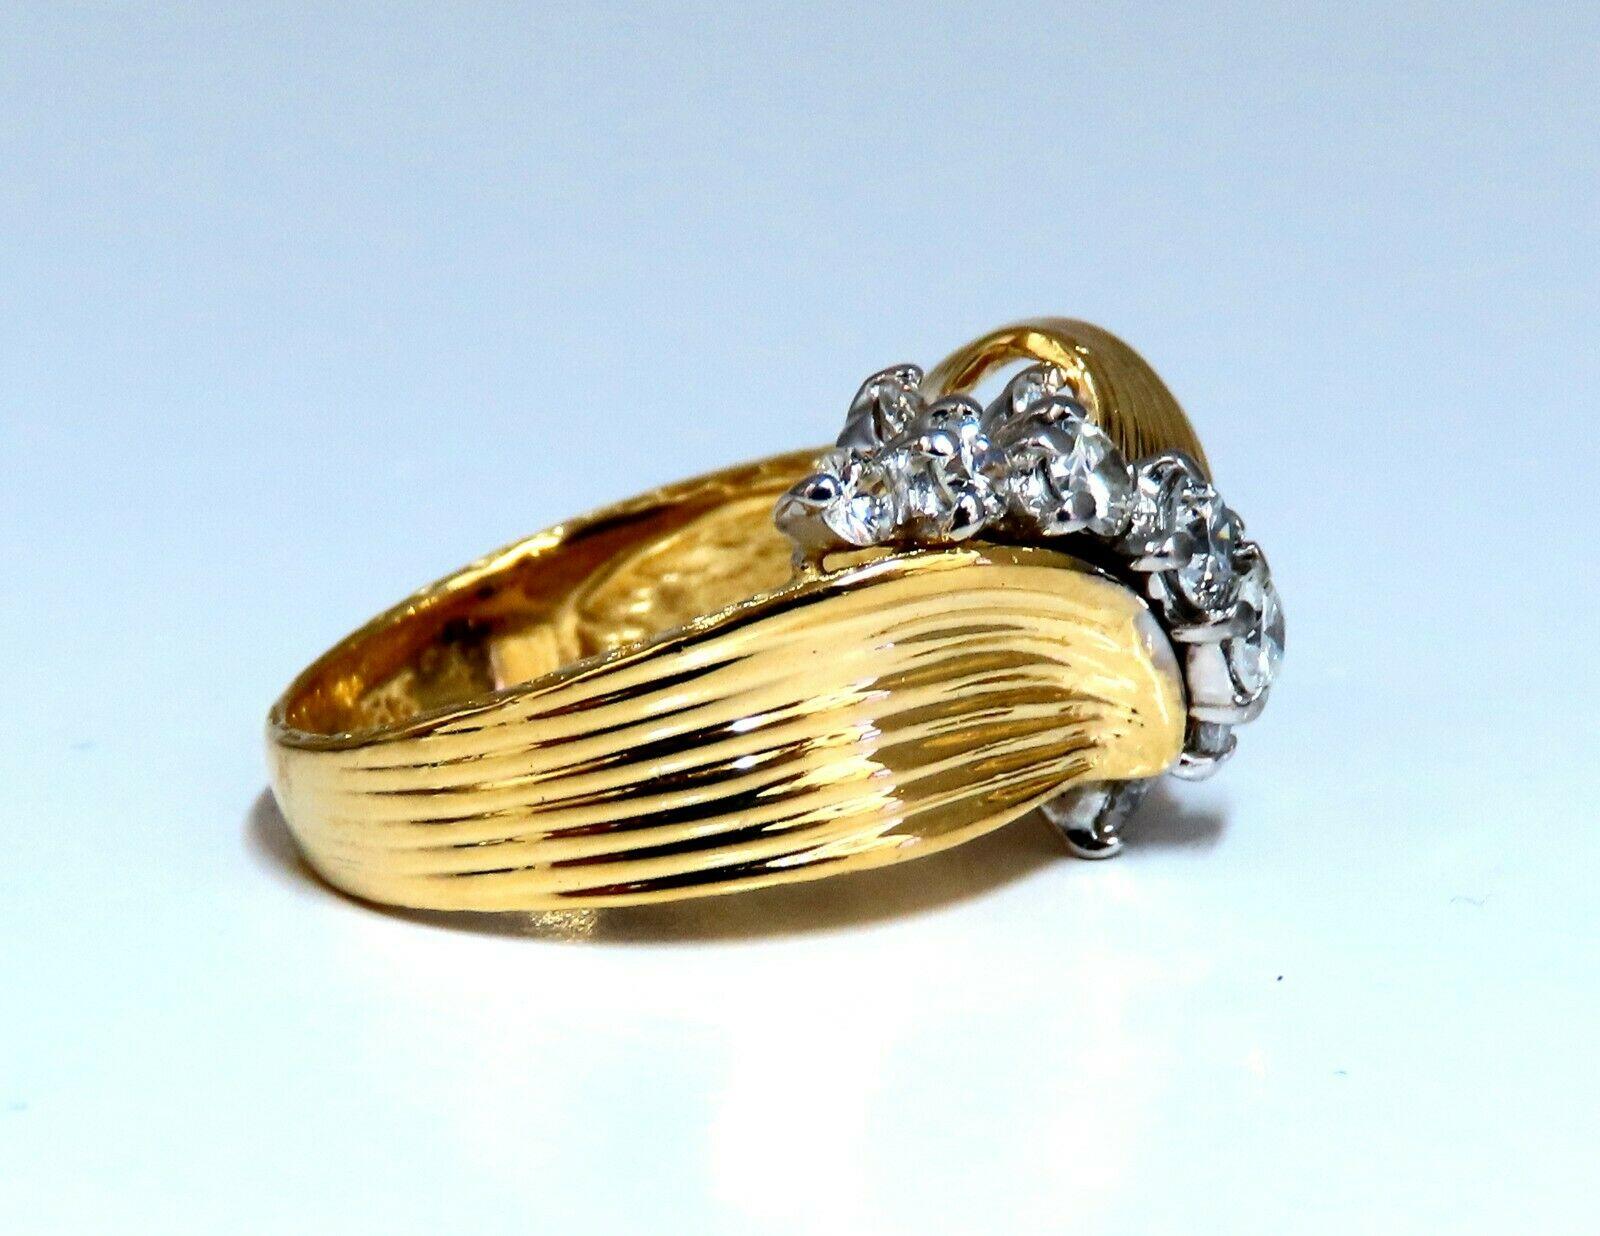 Regency Deco Wire Wrap Knot Ring

.80ct. Natural diamonds ring

G-color Vs-2 clarity 

Very good Cuts / Full cut Brilliants

18kt yellow gold

Ring size: 6

(Complimentary resizing available)

Ring is 12.7mm wide

7.8mm depth.

$4000 Appraisal